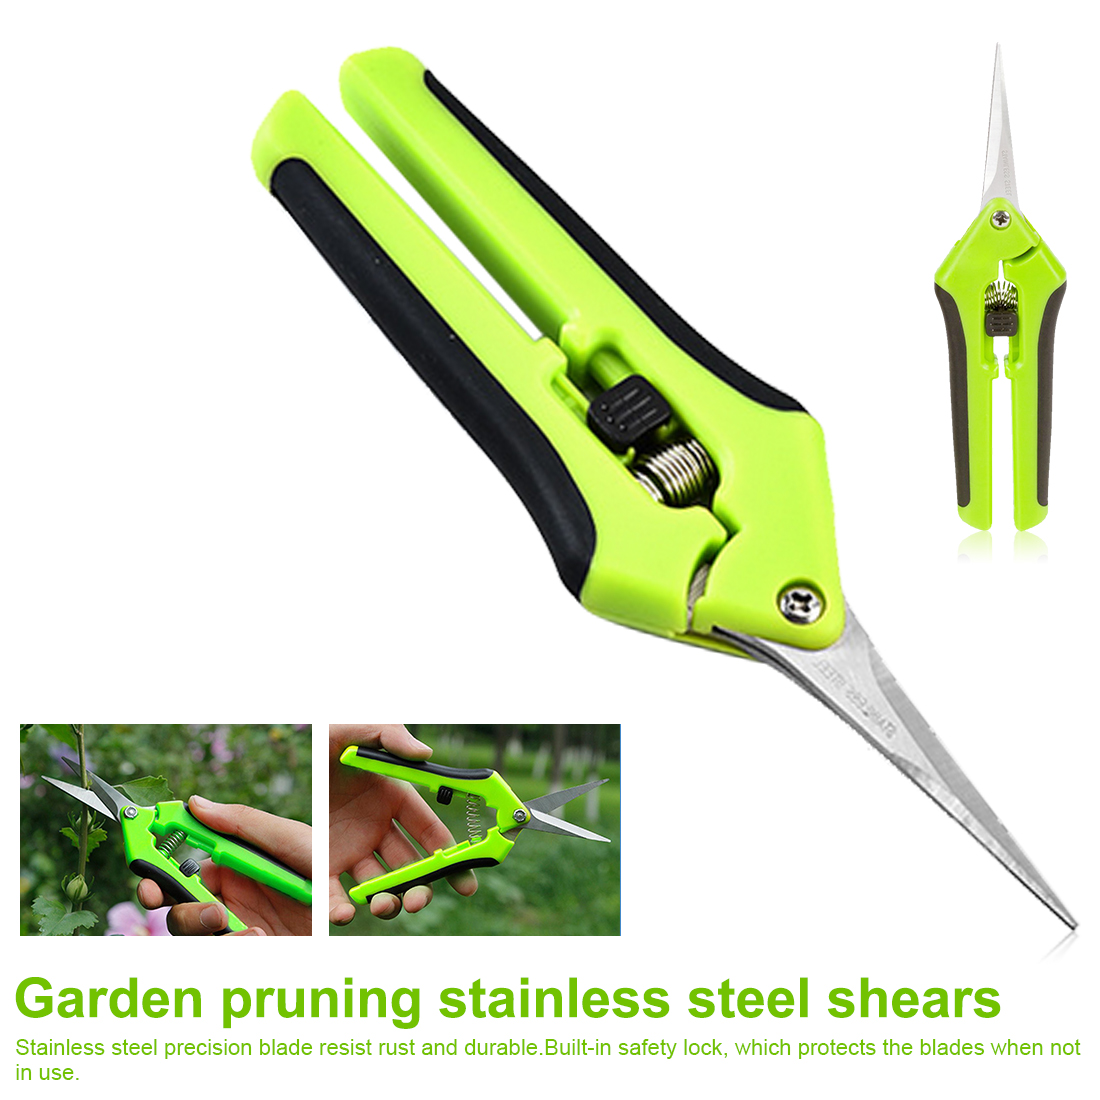 Fruit Picking Scissors Garden Pruning Shears Stainless Steel Household Potted Trim Weed Branches Small Scissors Gardening Tools